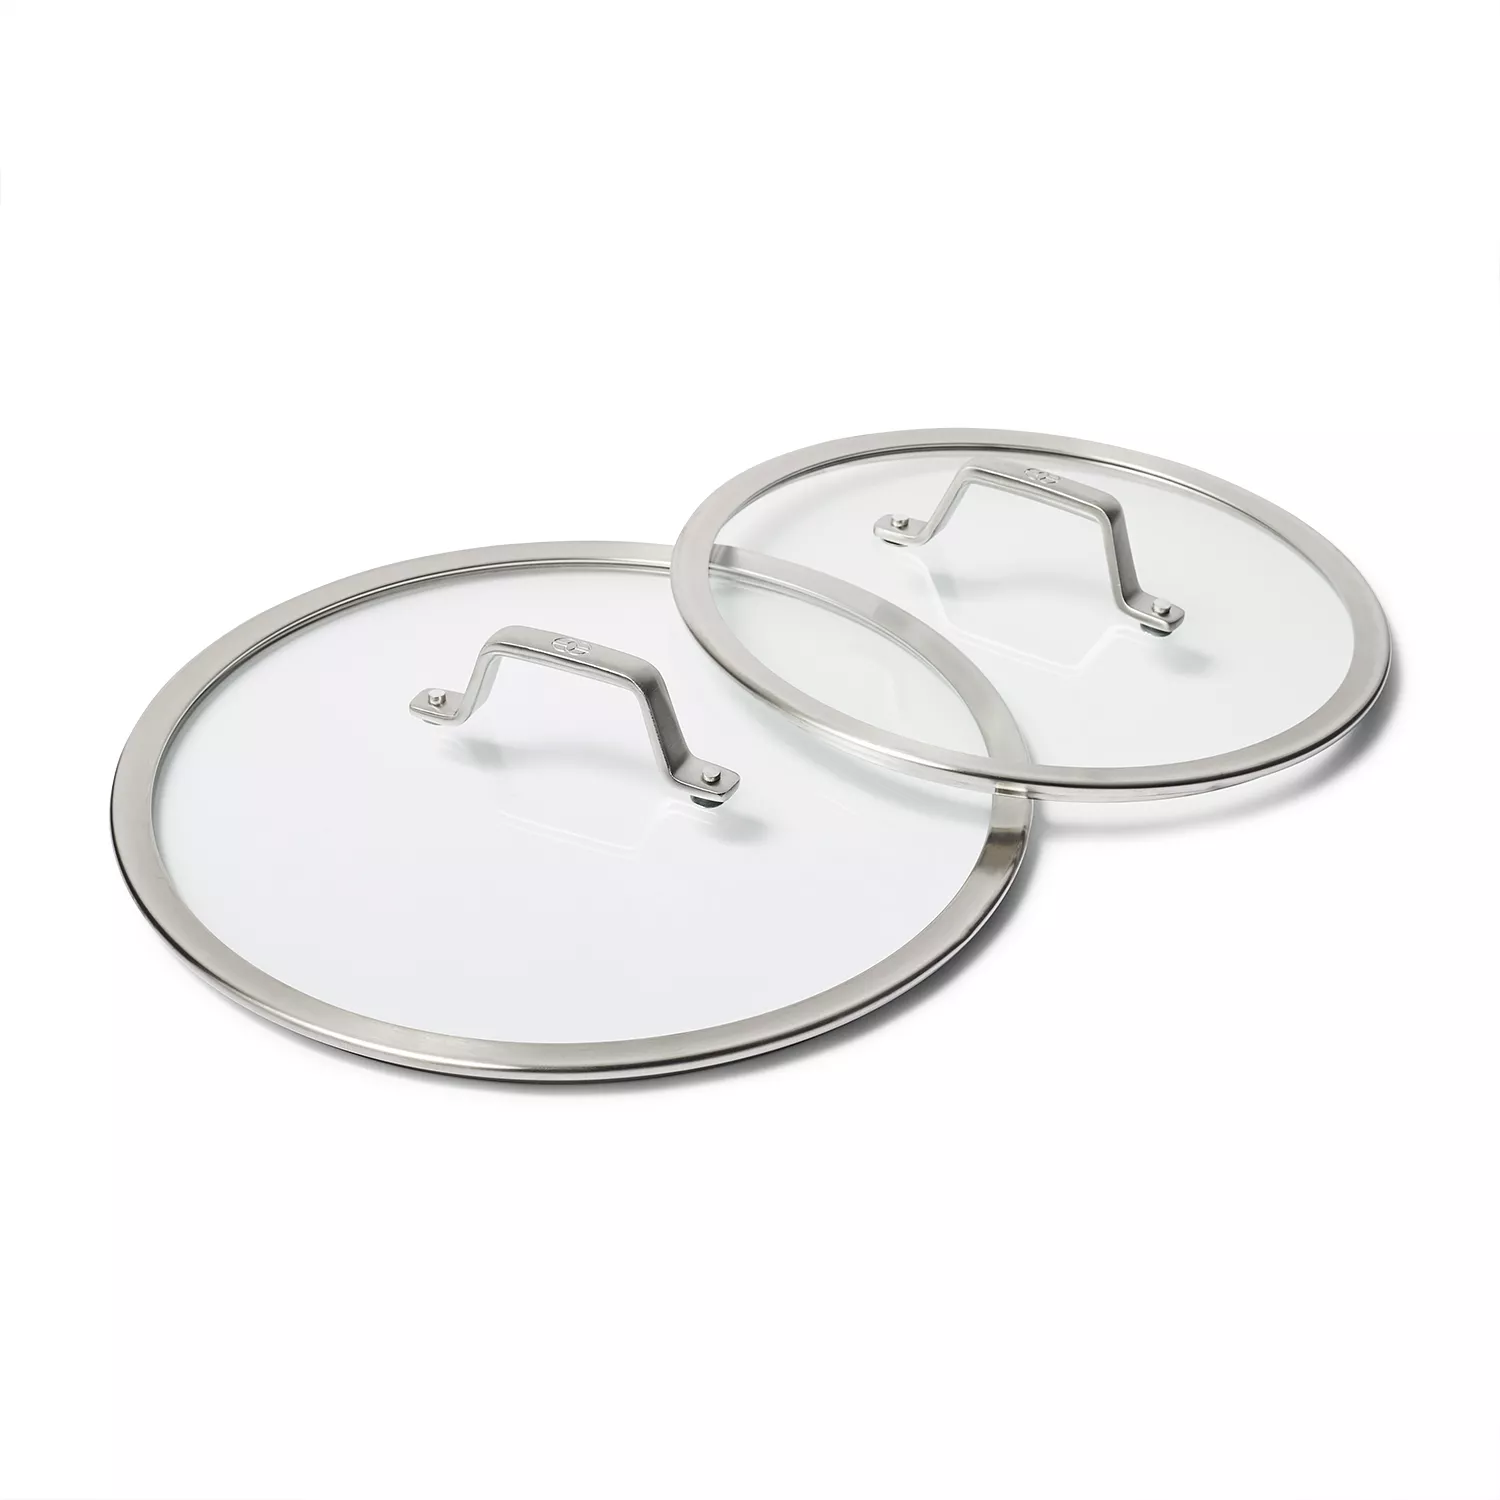 Calphalon Premier 10-Inch and 12-Inch Glass Lid Combo